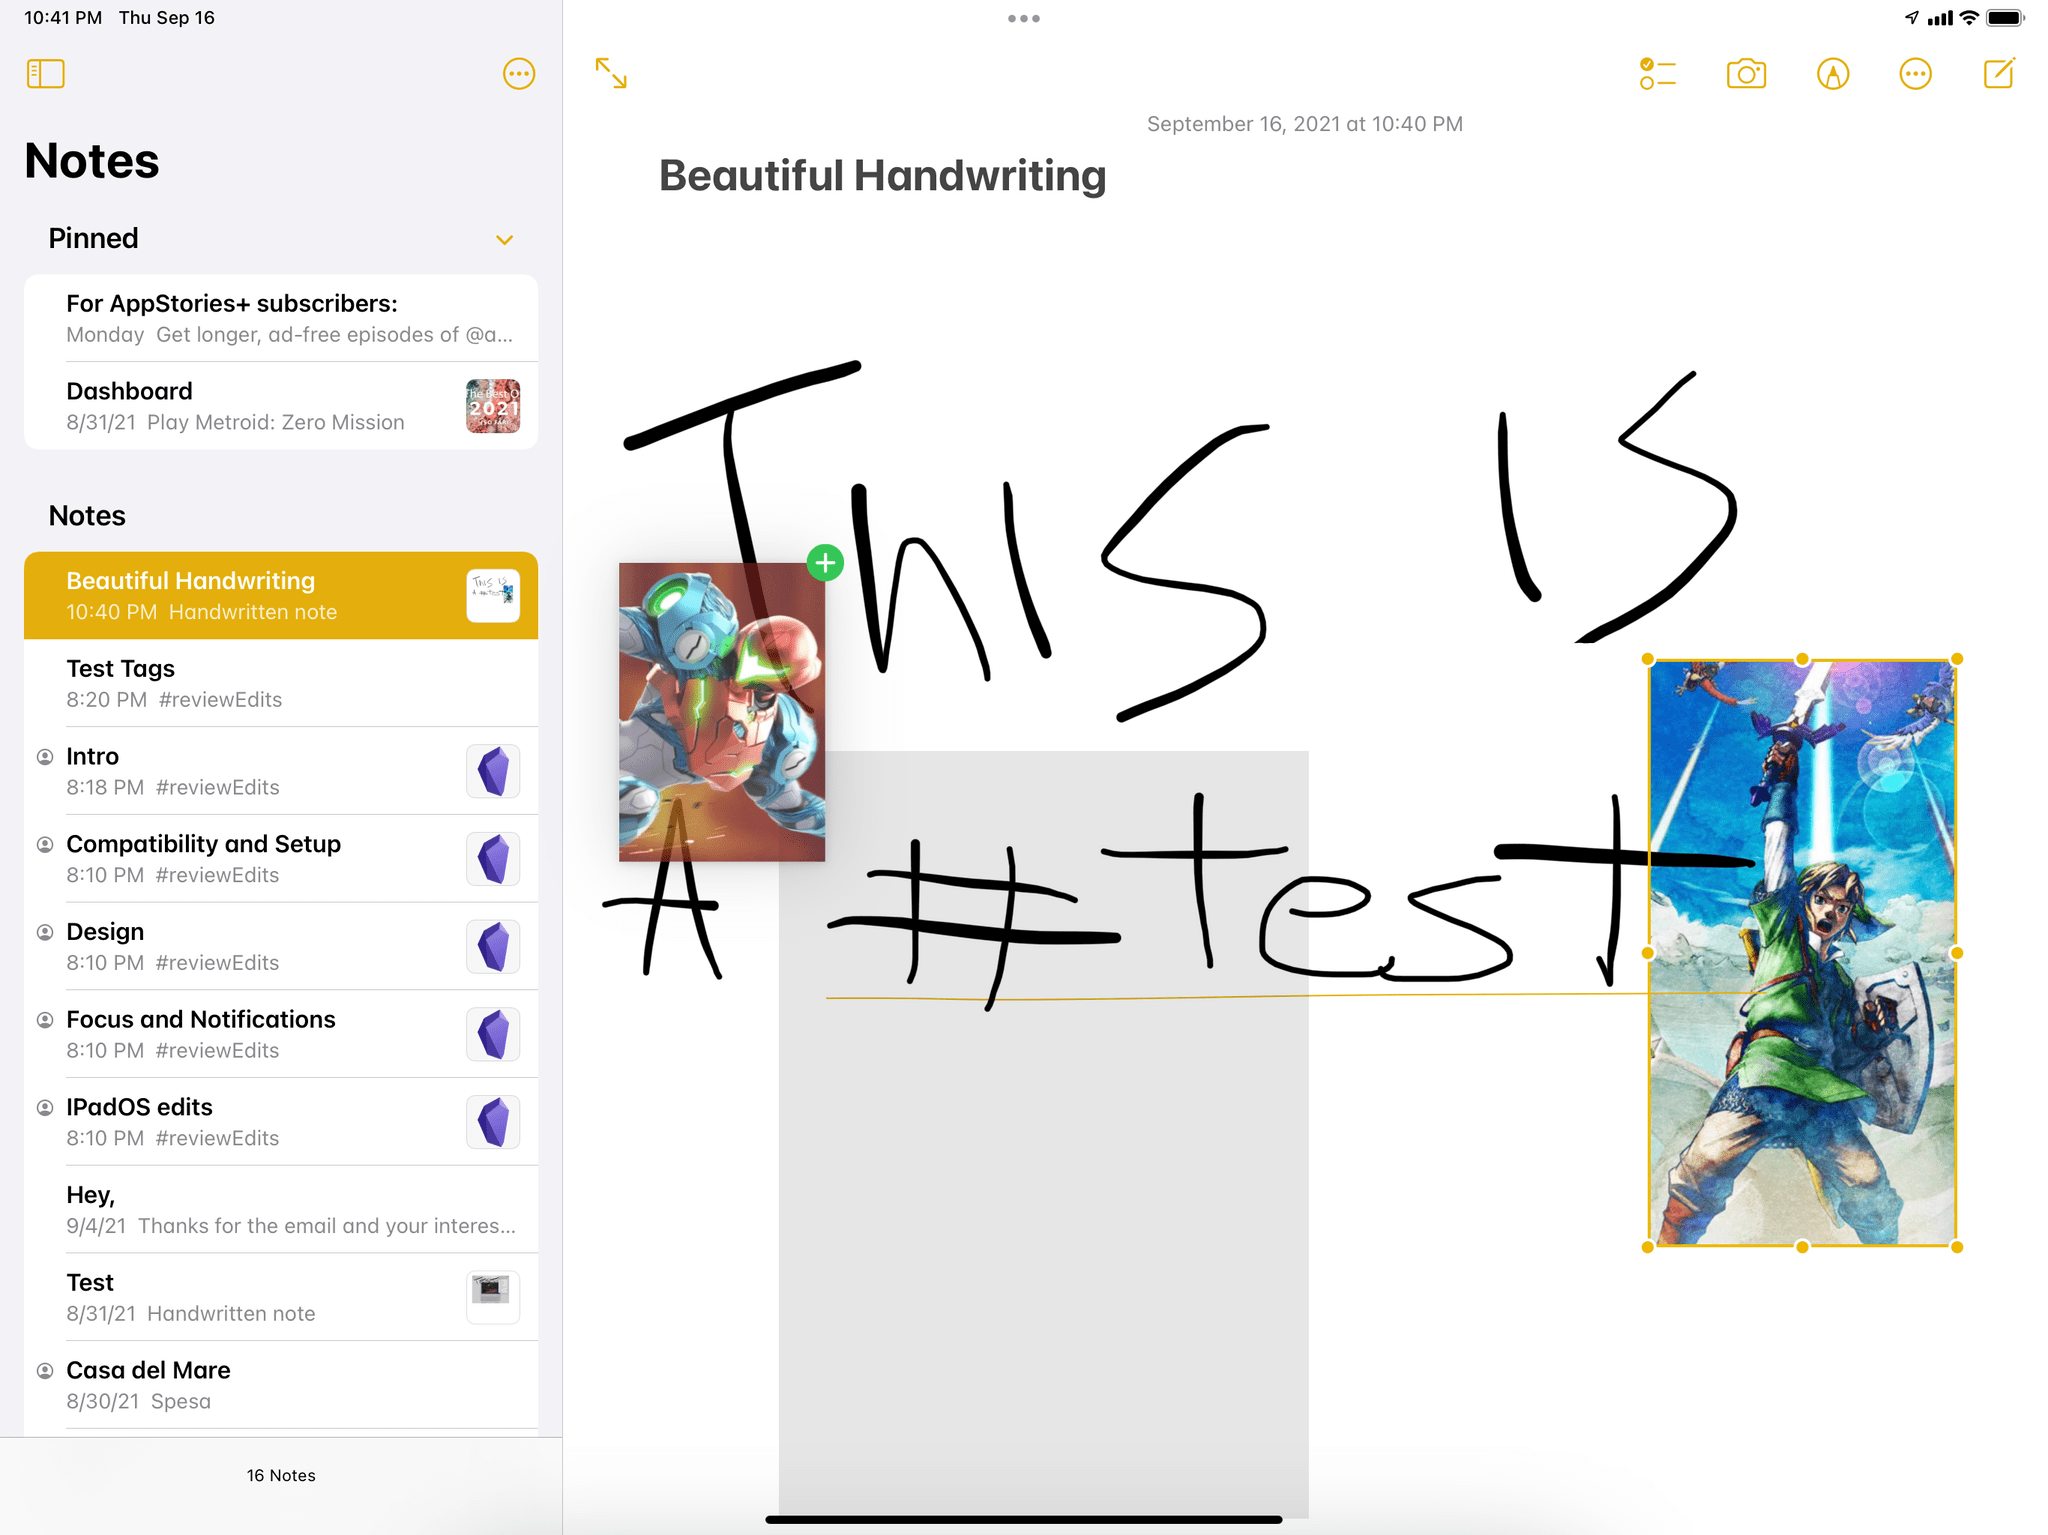 Images and handwriting can coexist in iPadOS 15.